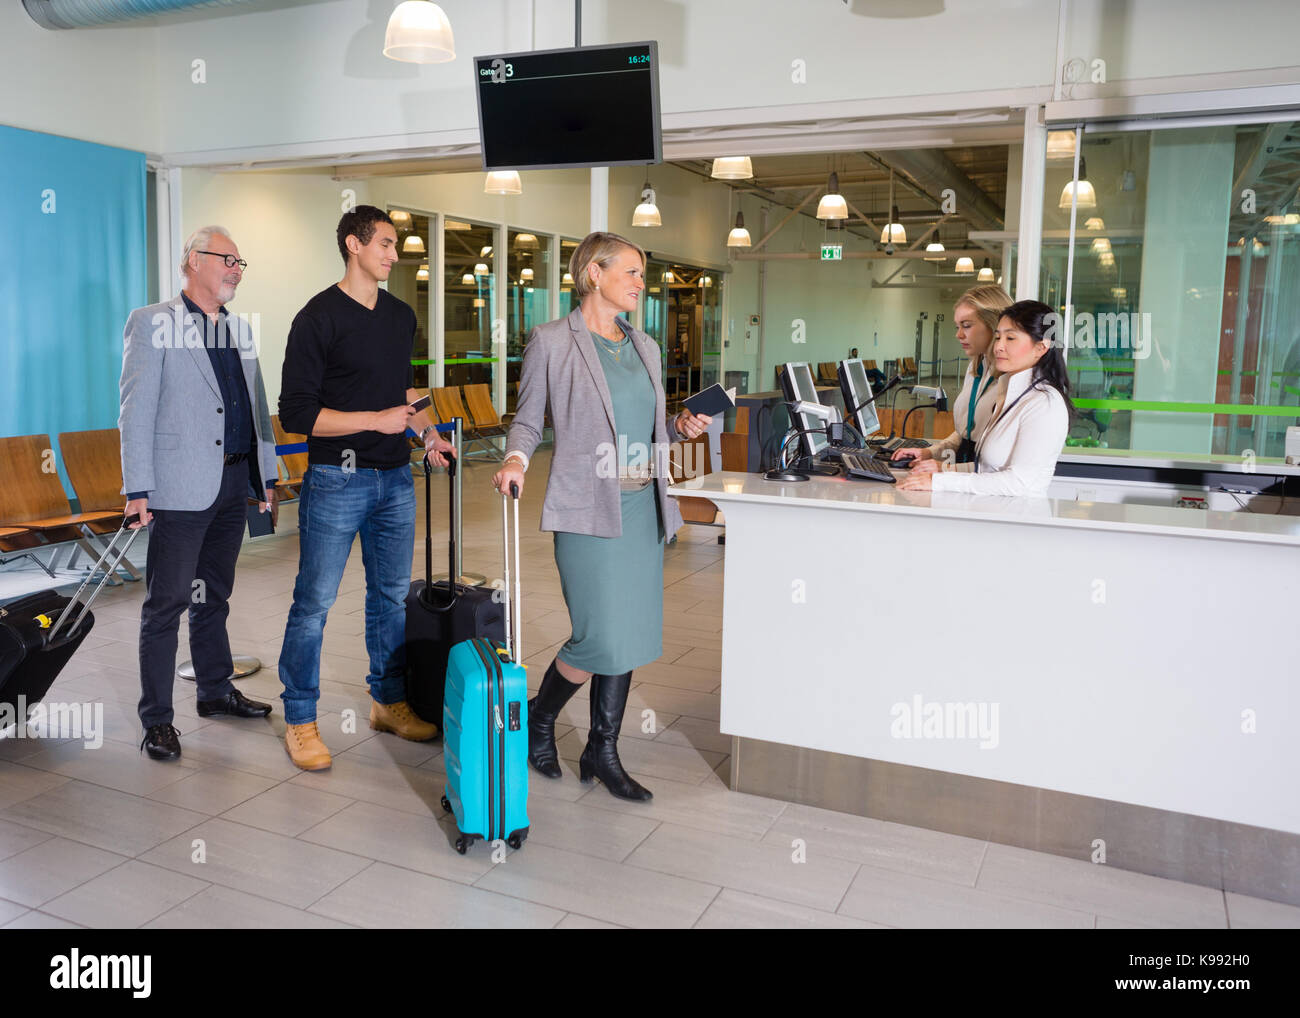 Passengers With Luggage Waiting At Airport Reception Stock Photo